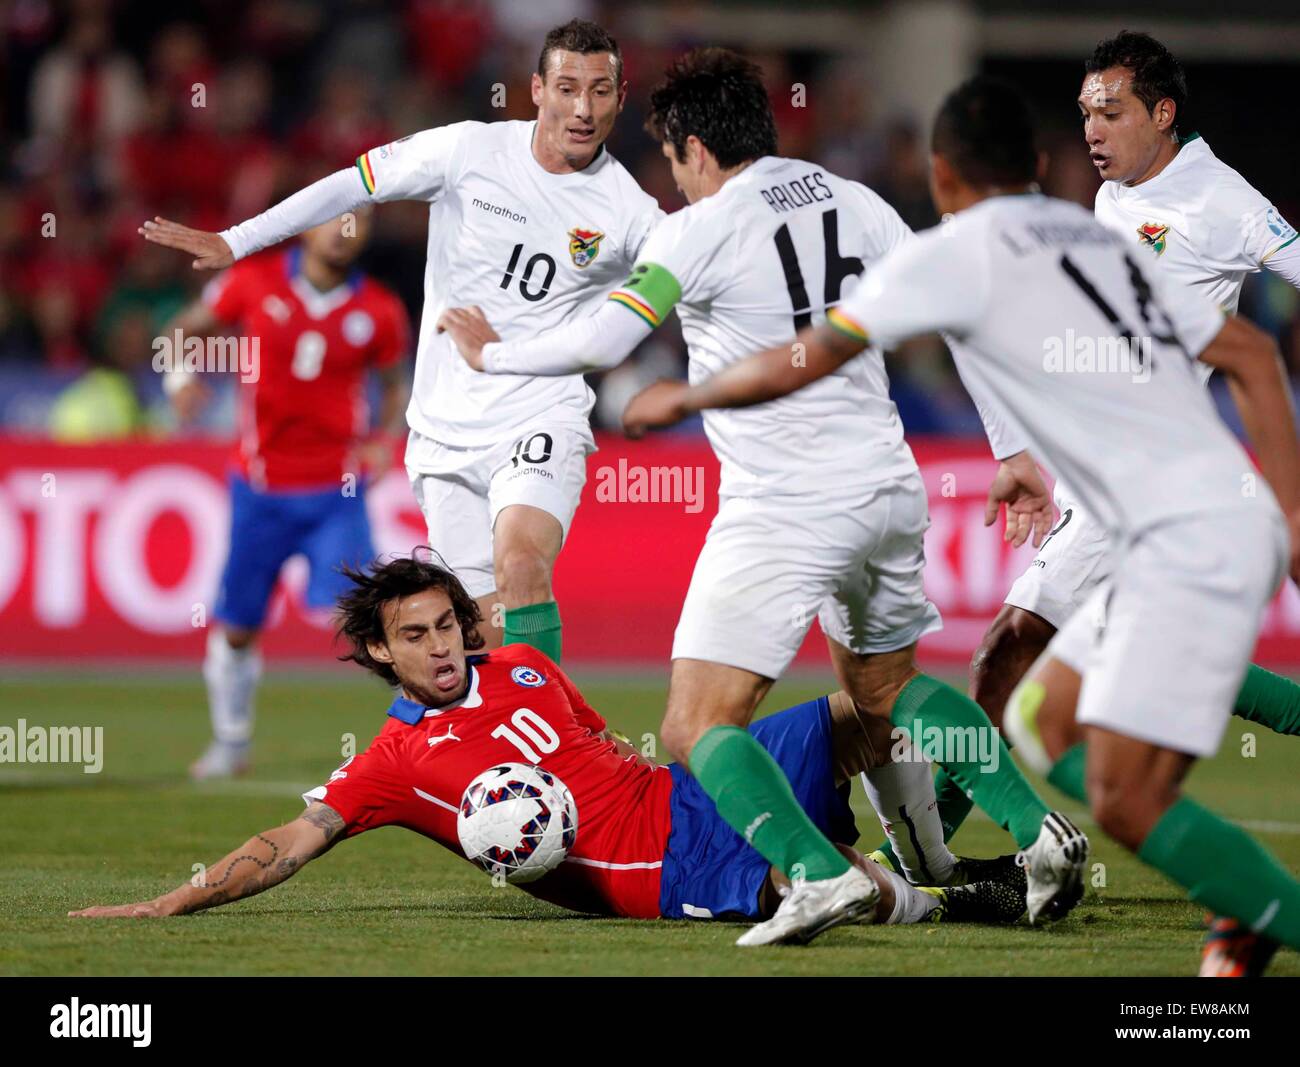 Santiago, Chile. 19th June, 2015. Chile's Jorge Valdivia (Below) vies with Bolivia's Ronald Raldes (3rd R) during the Group A match of the Copa America Chile 2015, held in the National Stadium, in Santiago, Chile, on June 19, 2015. Chile won 5-0. Credit:  Guillermo Arias/Xinhua/Alamy Live News Stock Photo